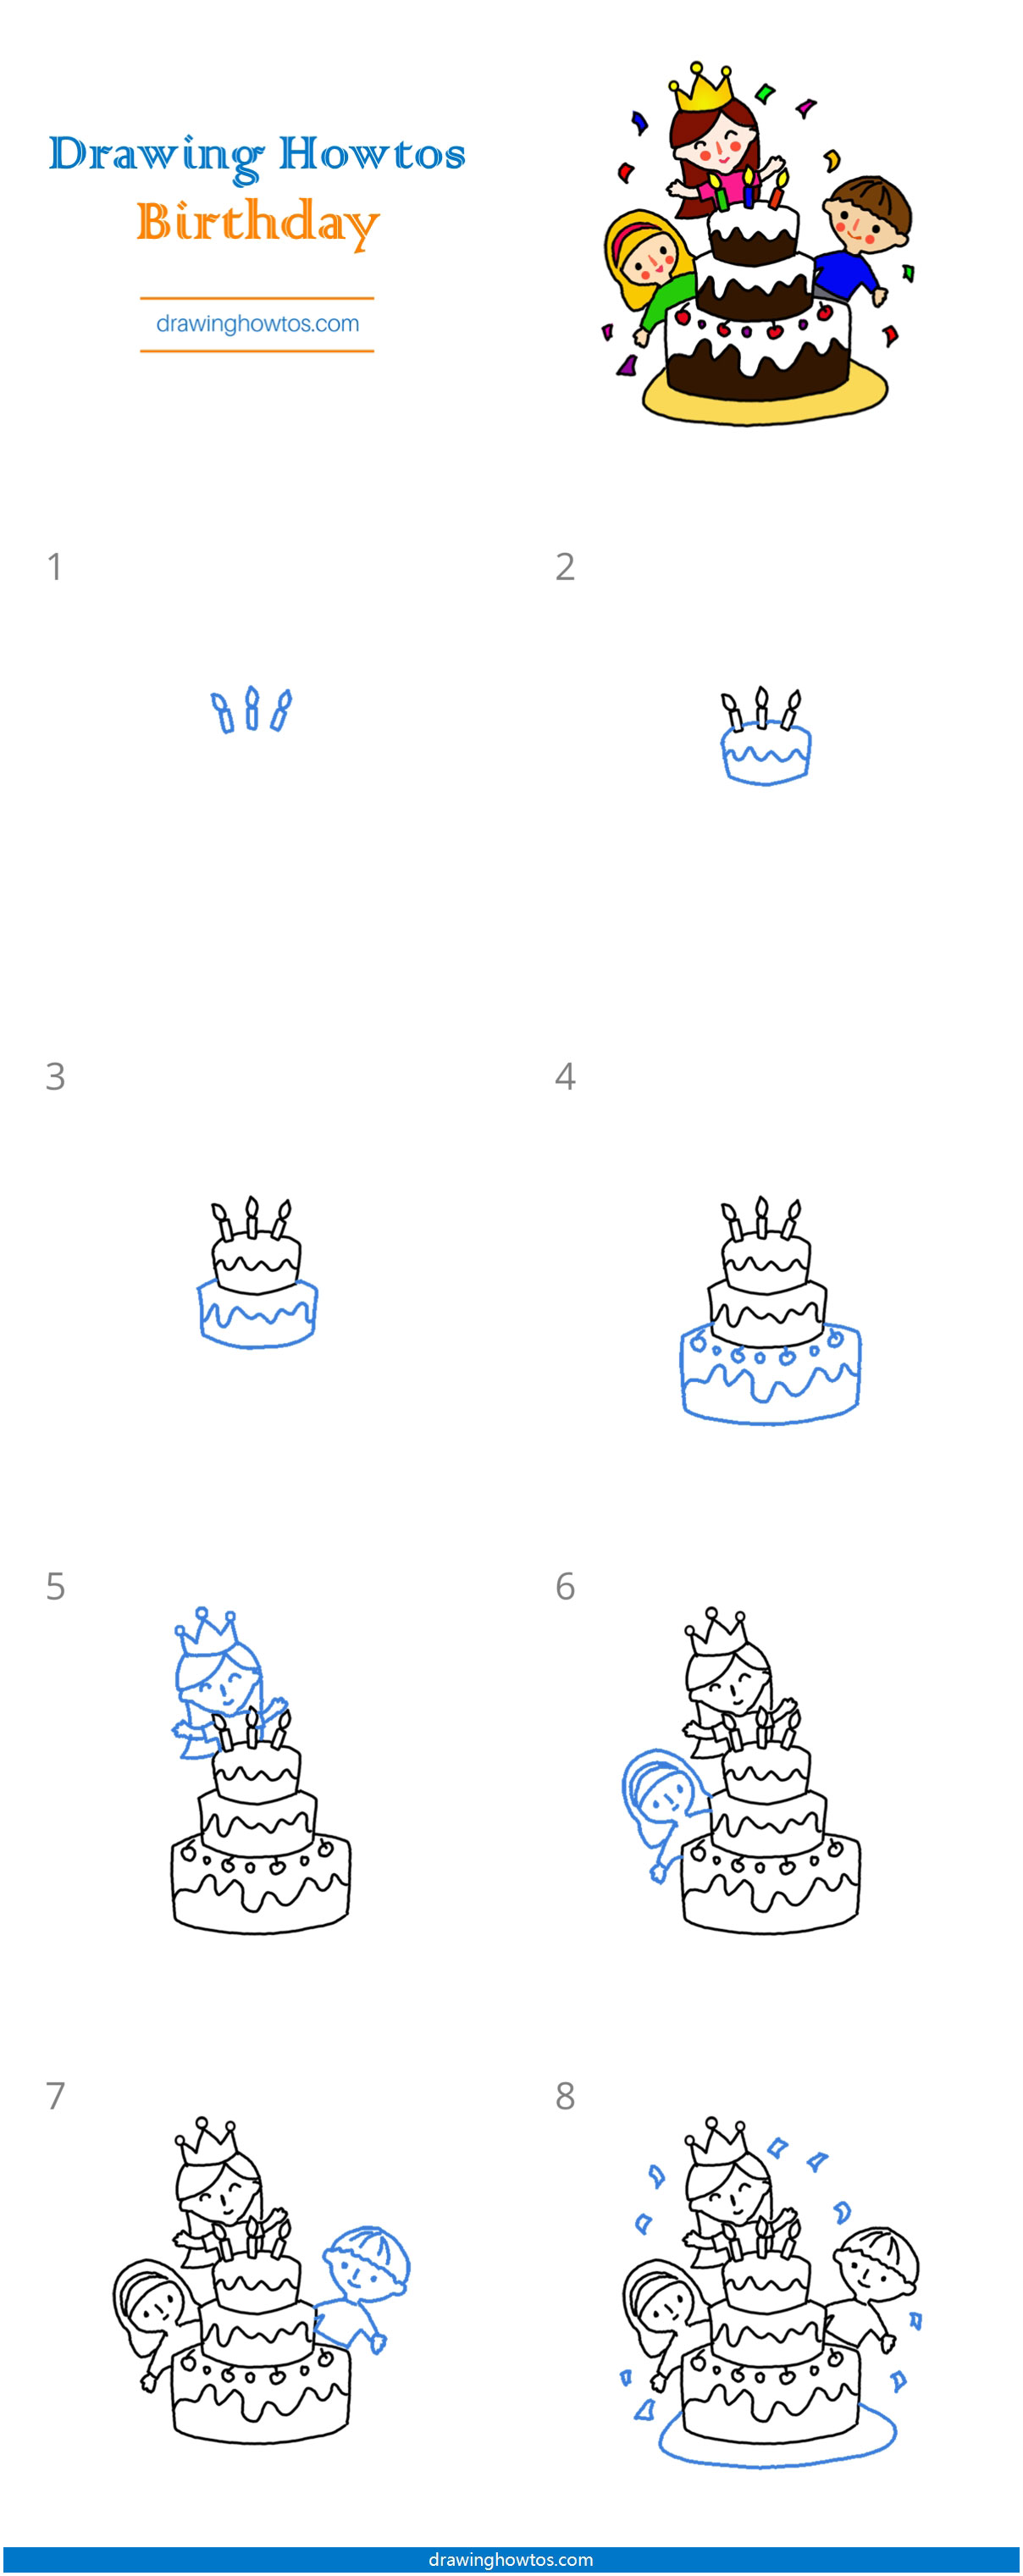 How to Draw a Birthday Party Step by Step